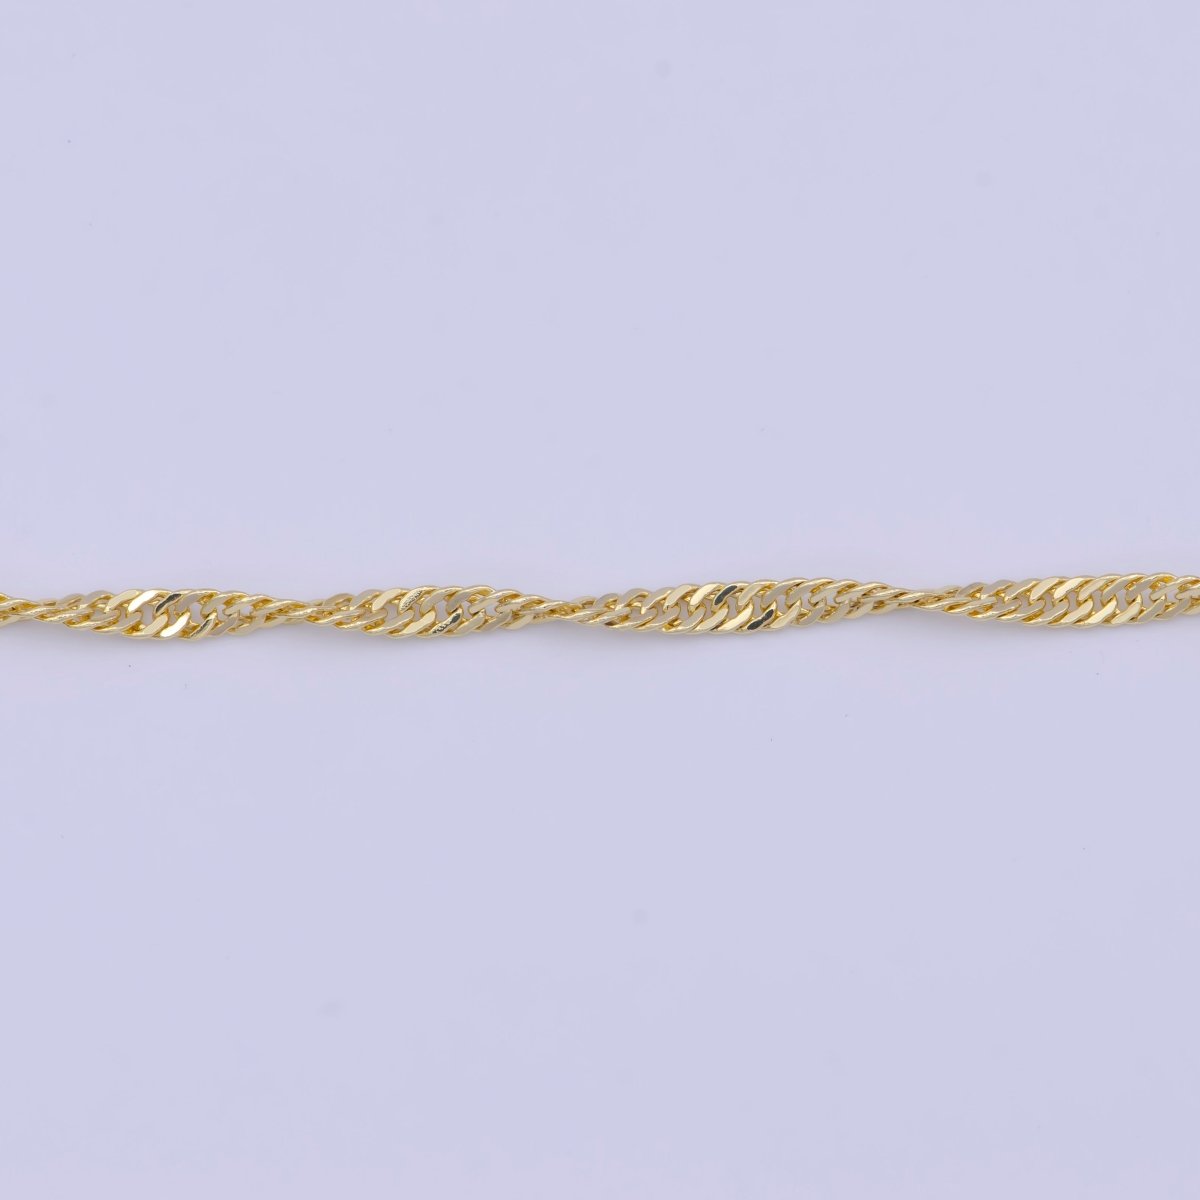 Dainty Singapore Chain Ready To Wear Gold Chain with Lobster Clasps 18 Inch Necklace For Jewelry Making | WA-1110 Clearance Pricing - DLUXCA